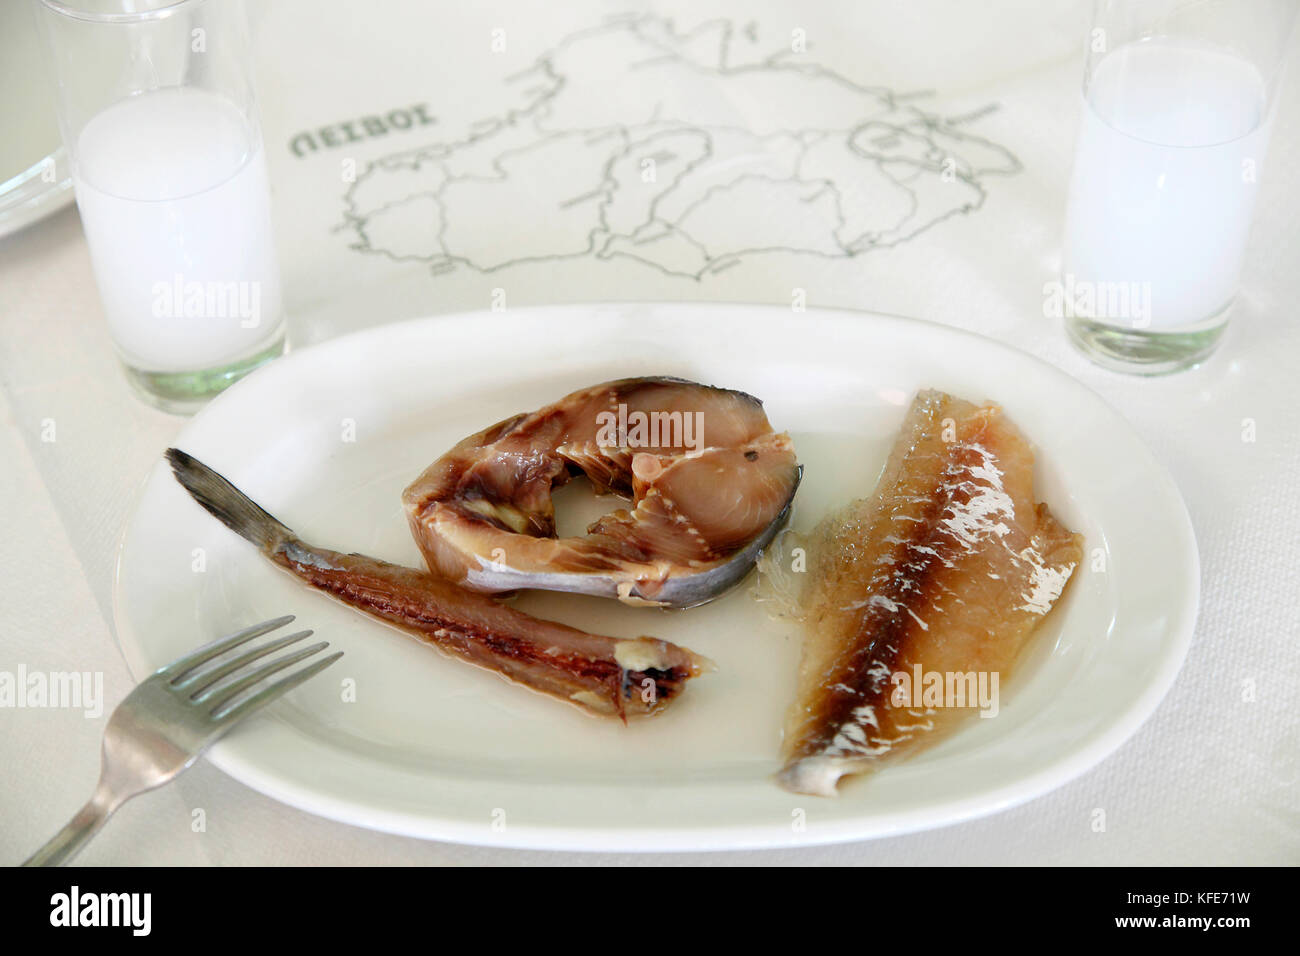 Greek traditional seafood, sardine, potted fish and fish fillet, and ouzo from the island of Lesvos, Greece. Stock Photo